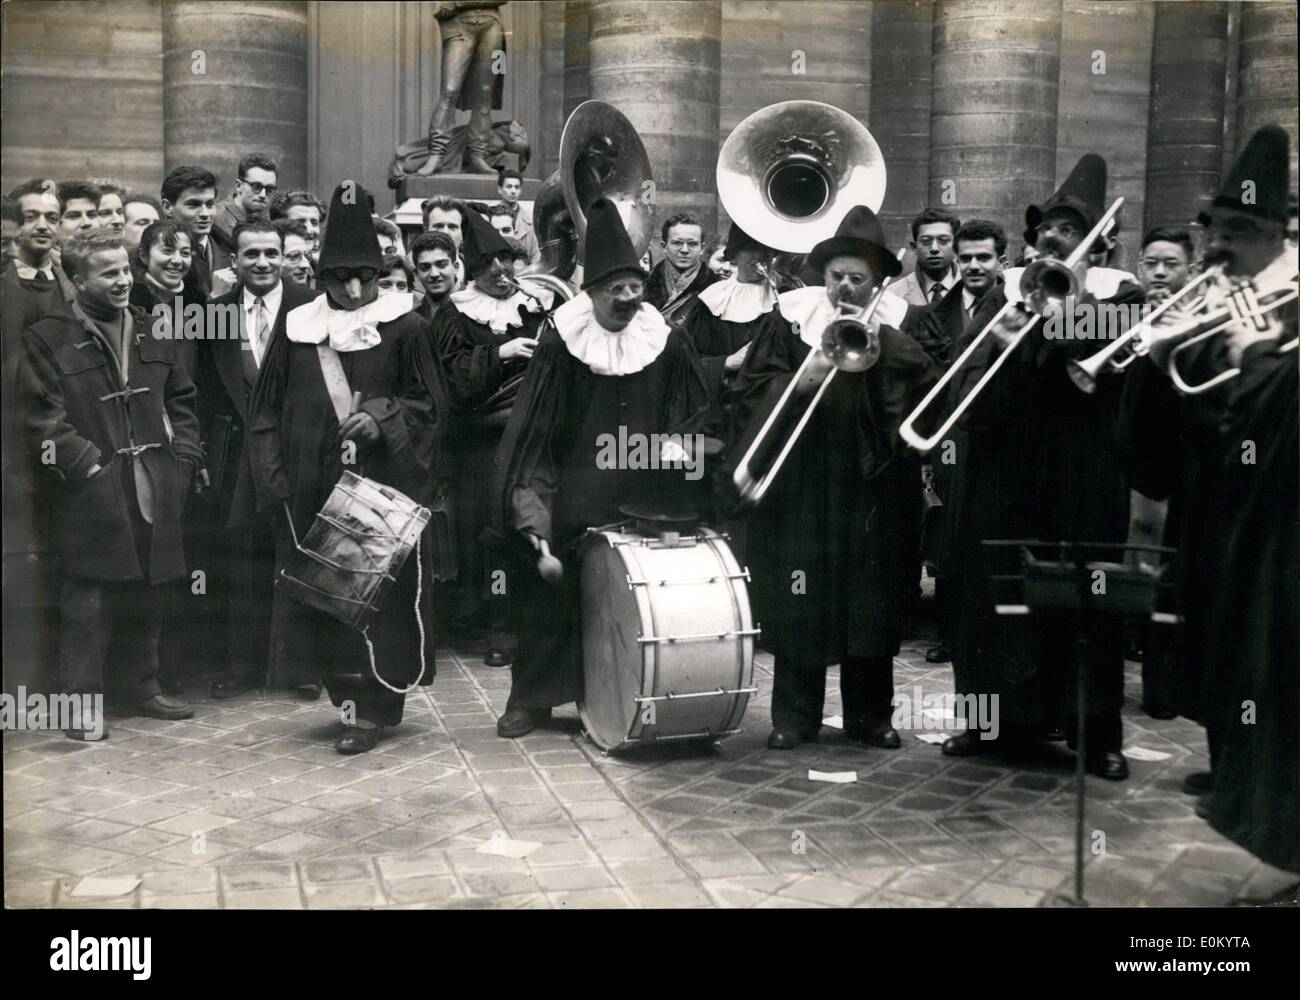 Dec. 12, 1952 - PARIS MEDICS IN ANNUAL FESTIVAL STUDENTS OF THE PARIS MEDICAL SCHOOL DISGUISED AS MOLIERE'S MUSICIANS, GIVE A CONCERTE DURING THE ANNUALFESTIVAL OF THE PARIS MEDICAL SCHOOL. Stock Photo